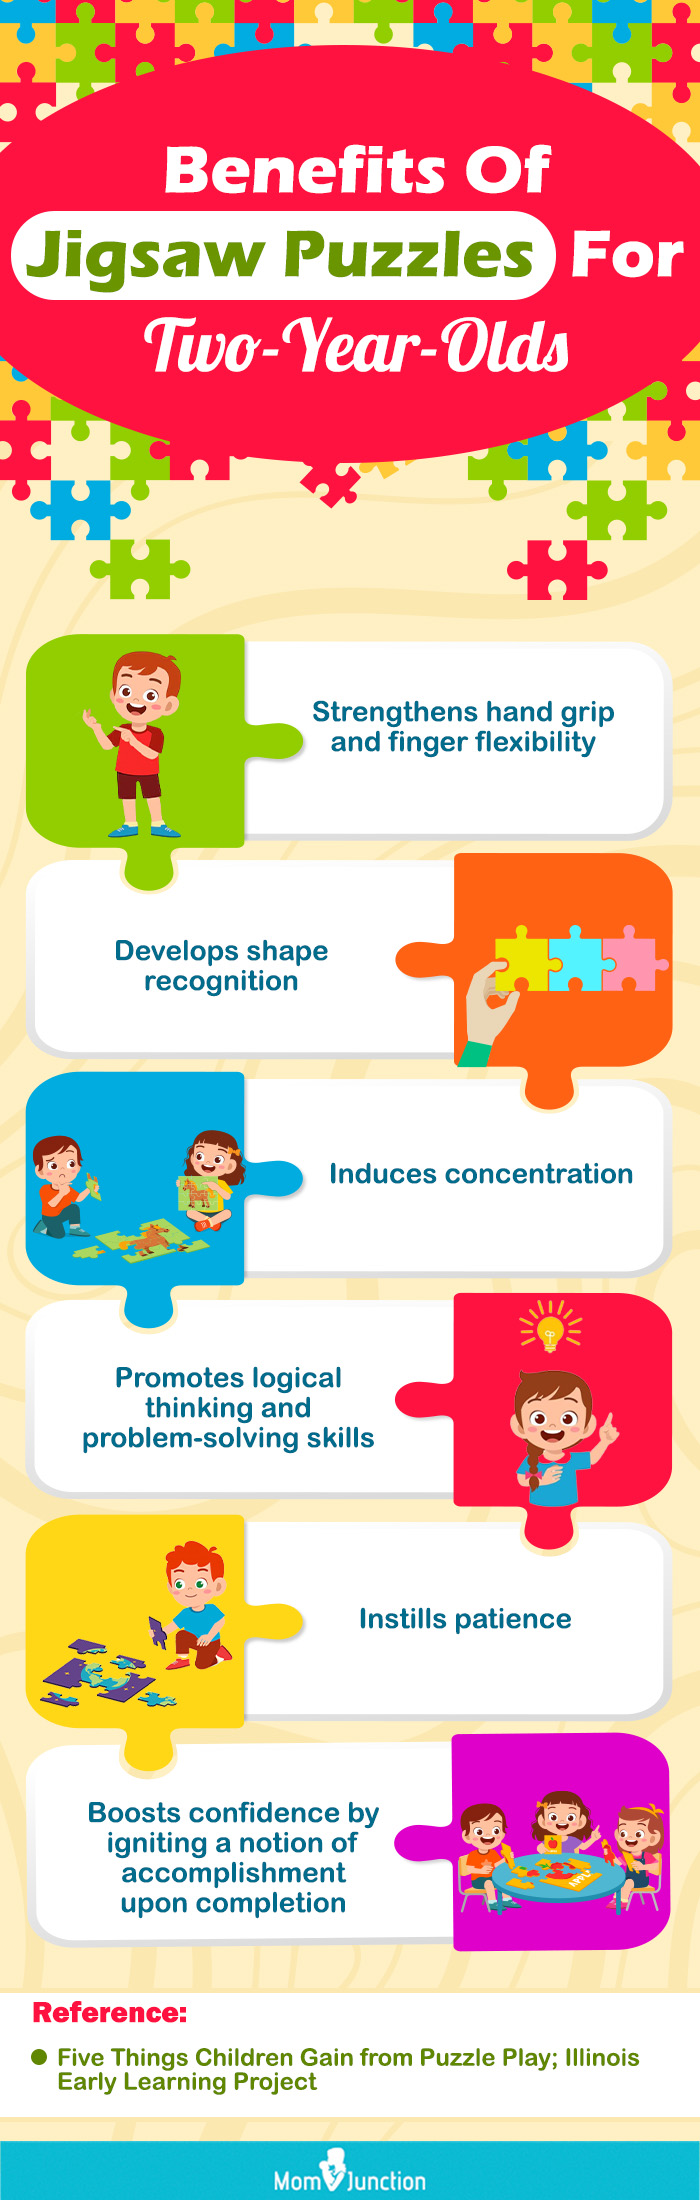 Benefits Of Jigsaw Puzzles For Two Year Olds (infographic)